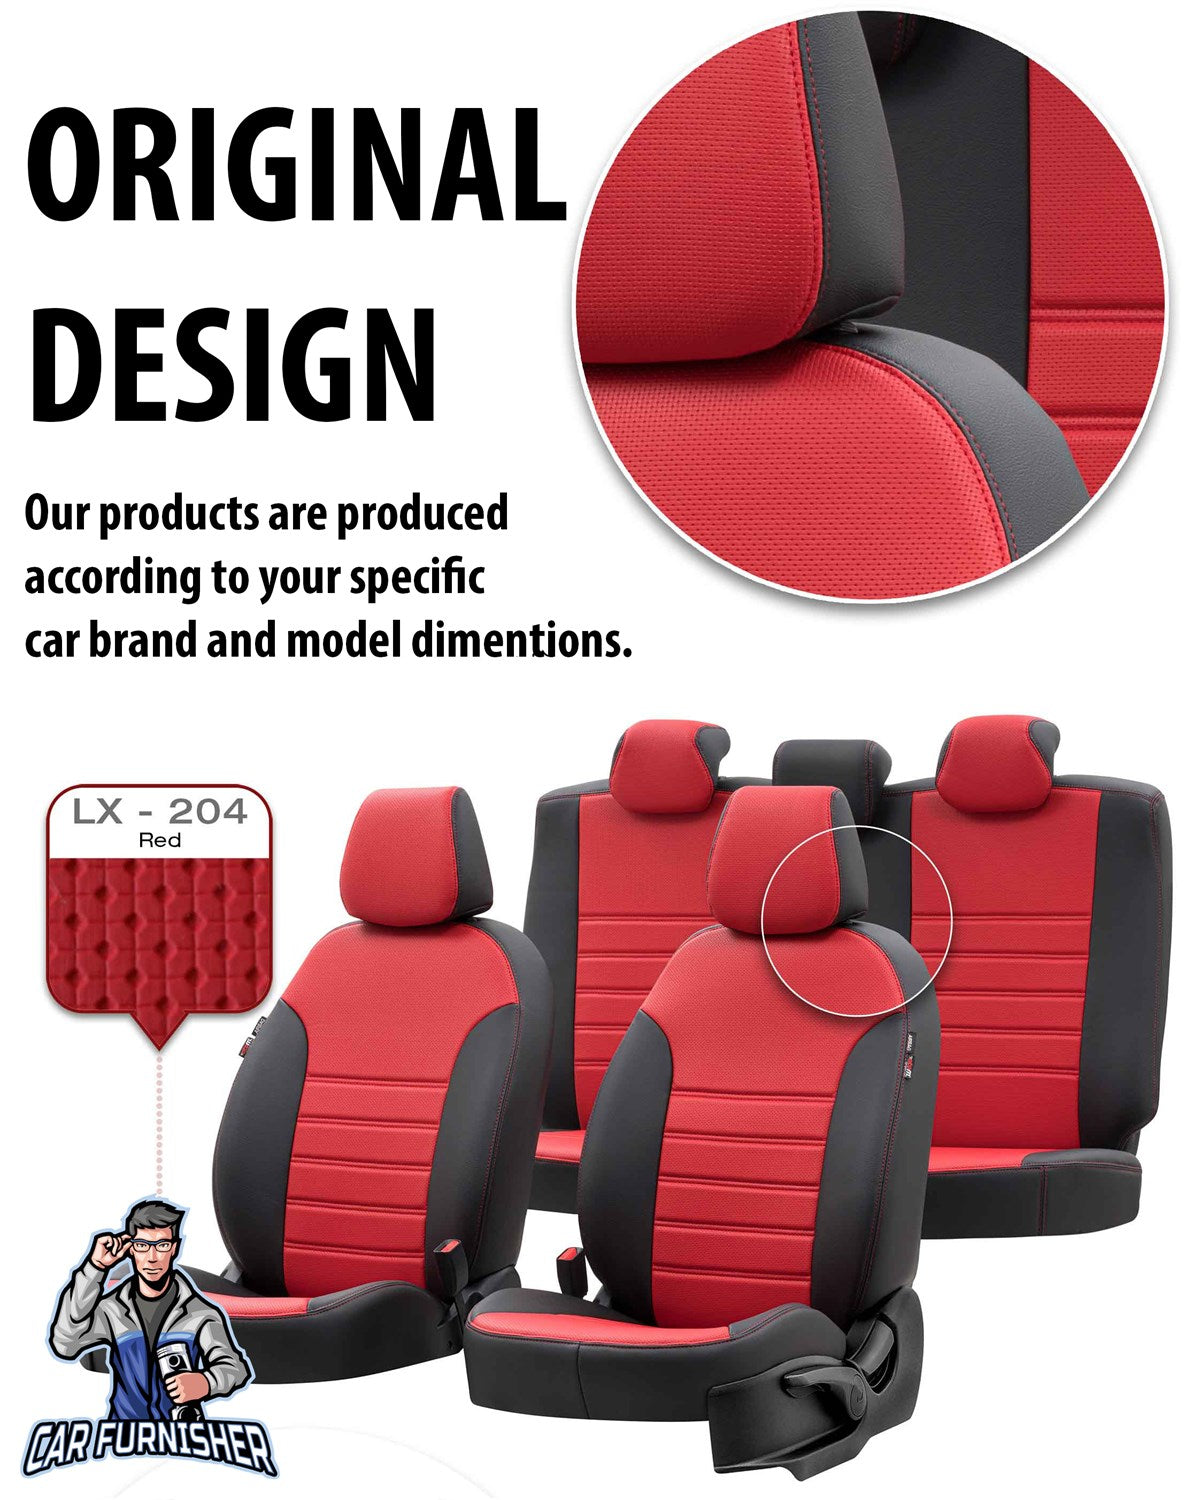 Citroen Jumpy Seat Covers New York Leather Design Red Leather